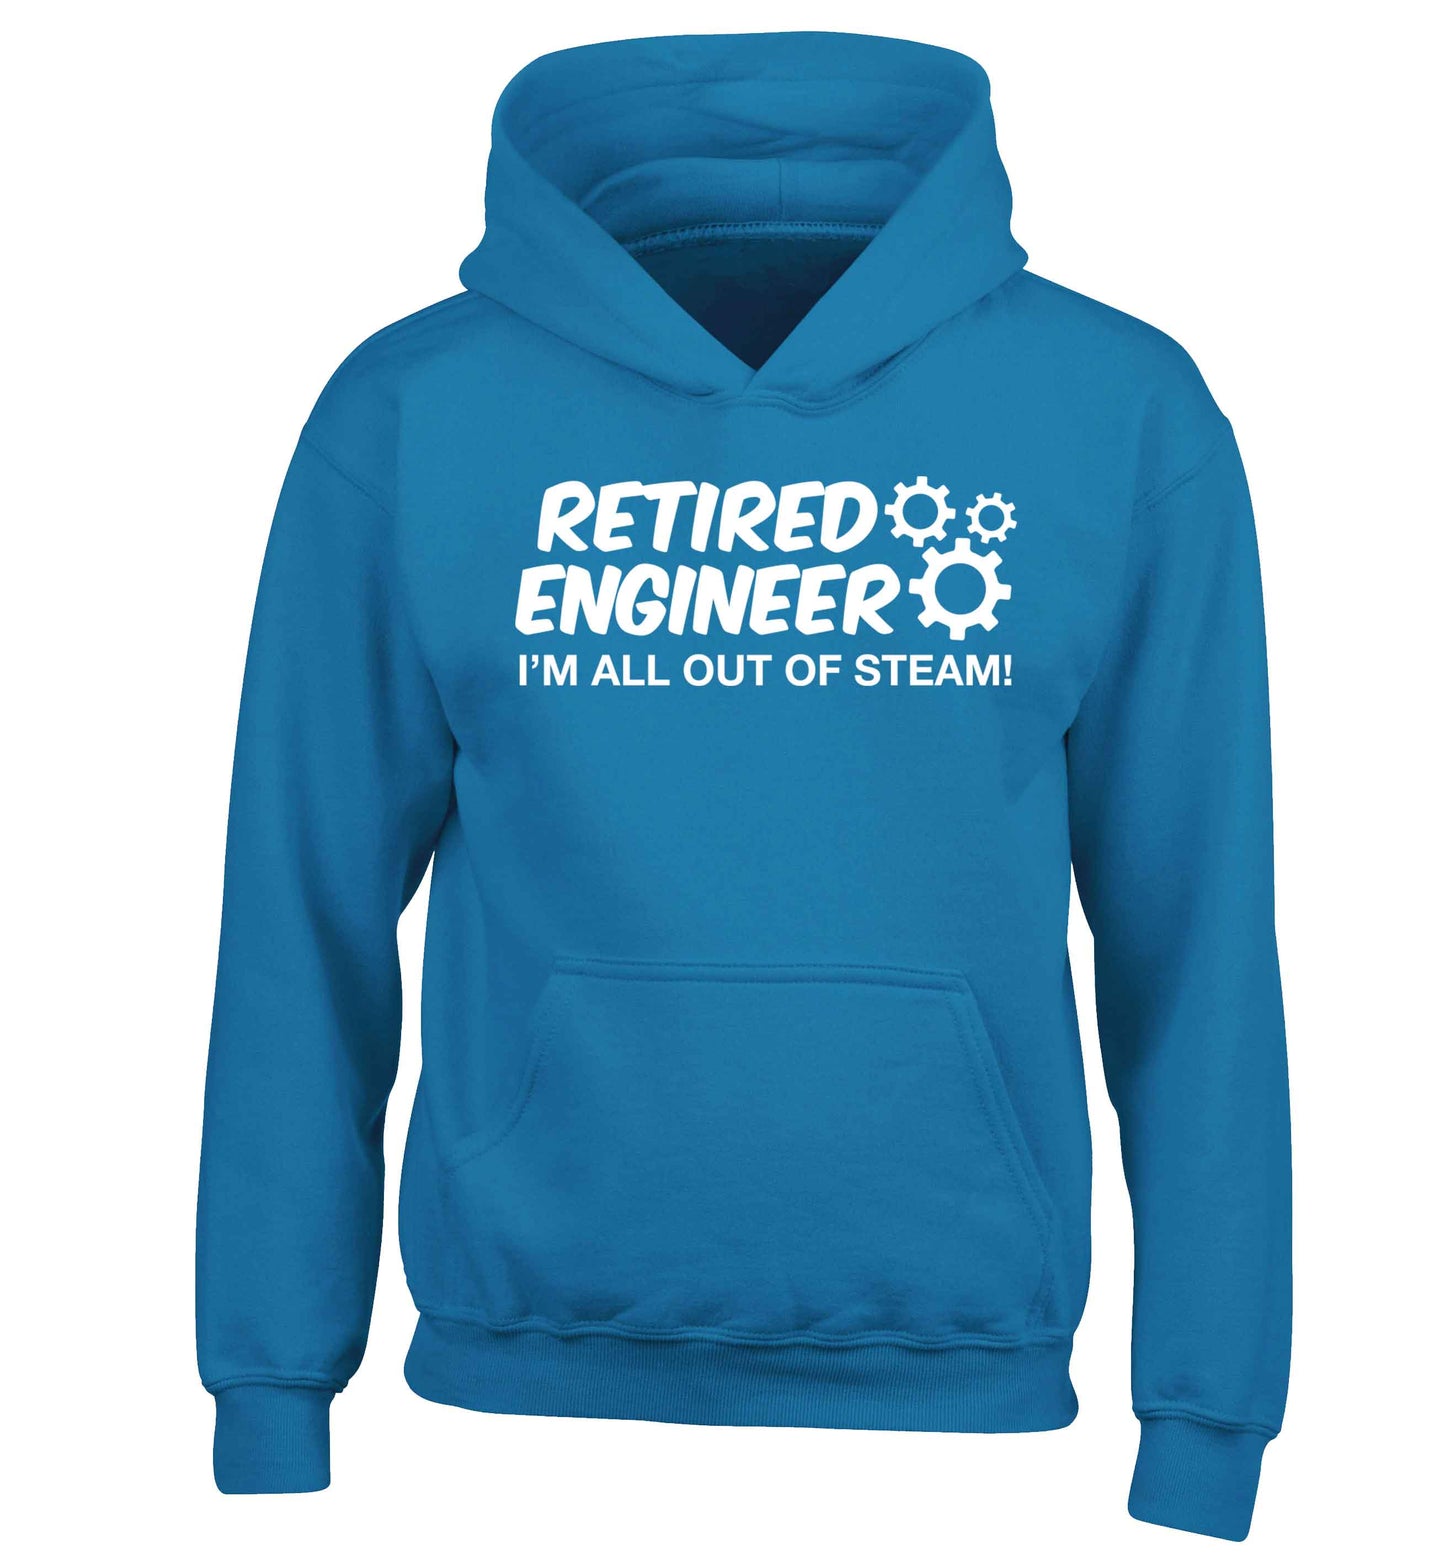 Retired engineer I'm all out of steam children's blue hoodie 12-13 Years